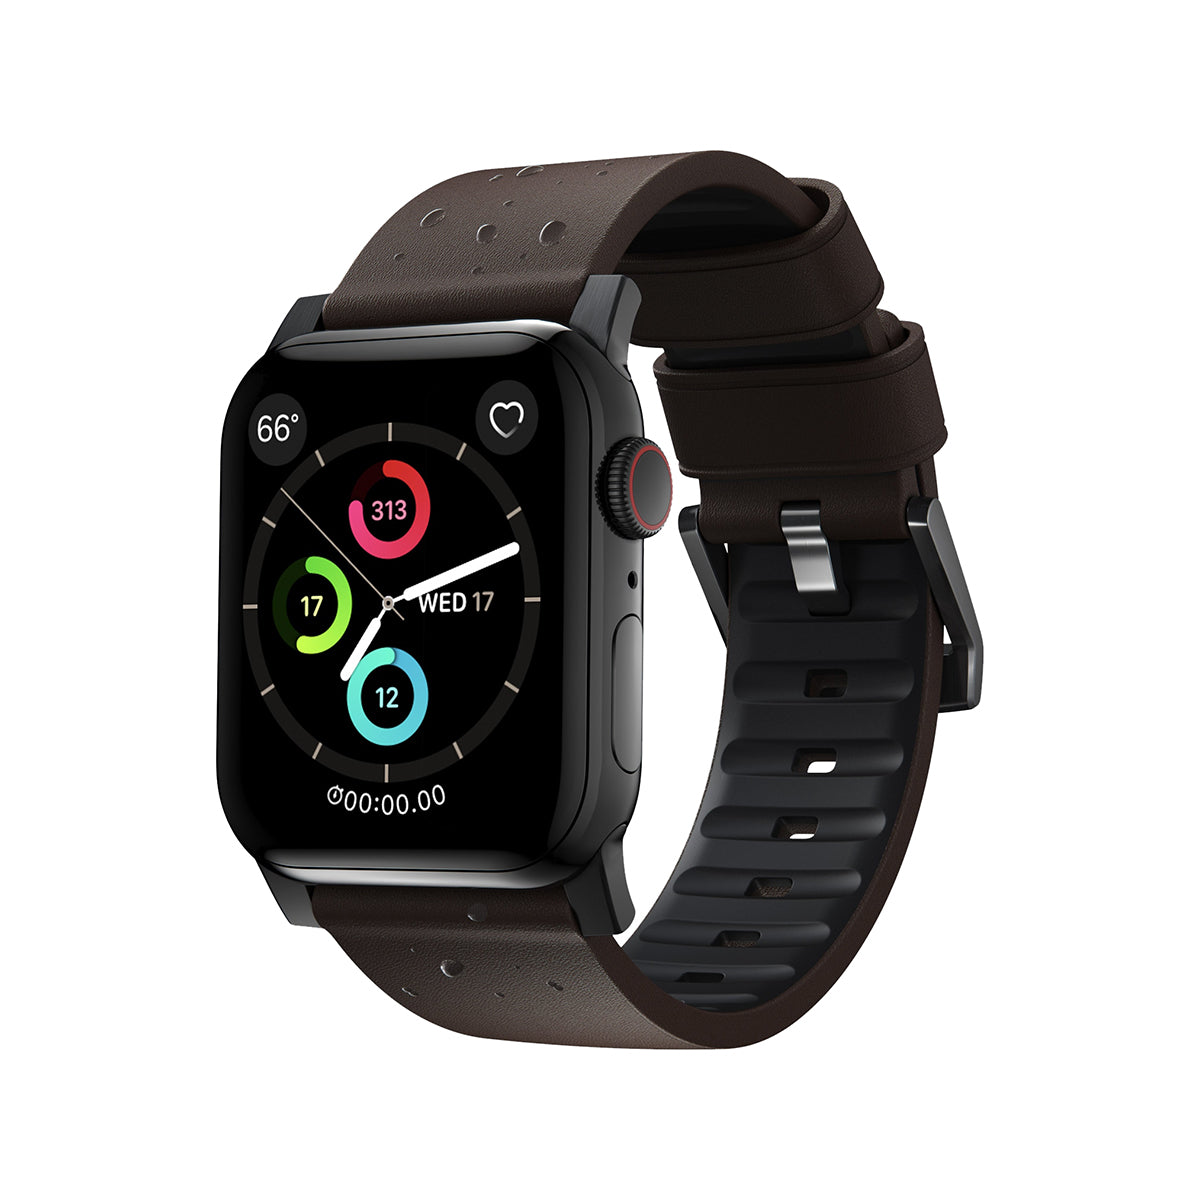 Nomad Apple Watch 41mm Active Band Pro - Black Hardware with Brown Leather Strap.